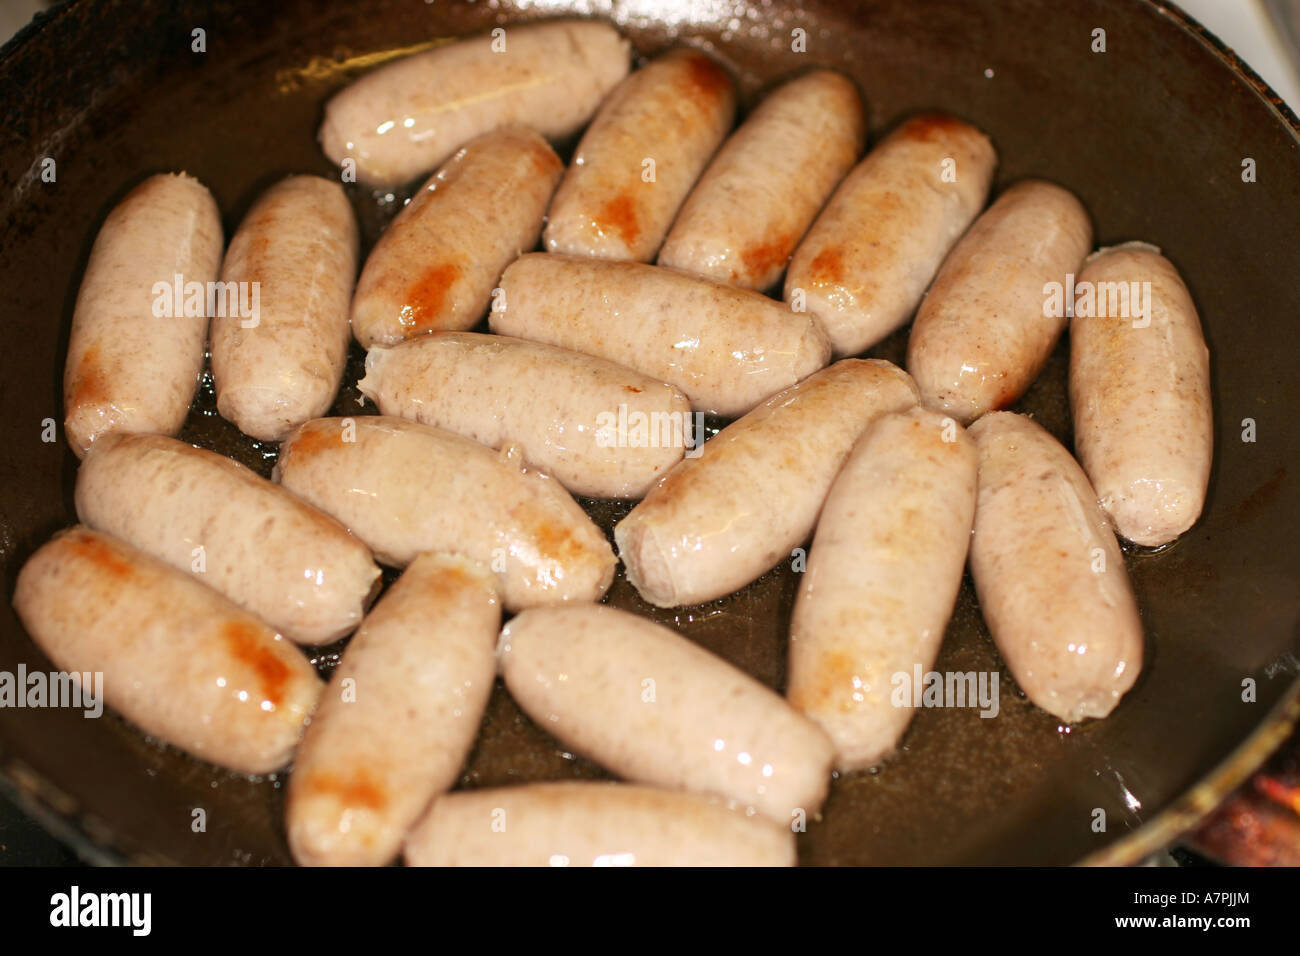 Small cocktail sausages cooking in a frying pan. Stock Photo